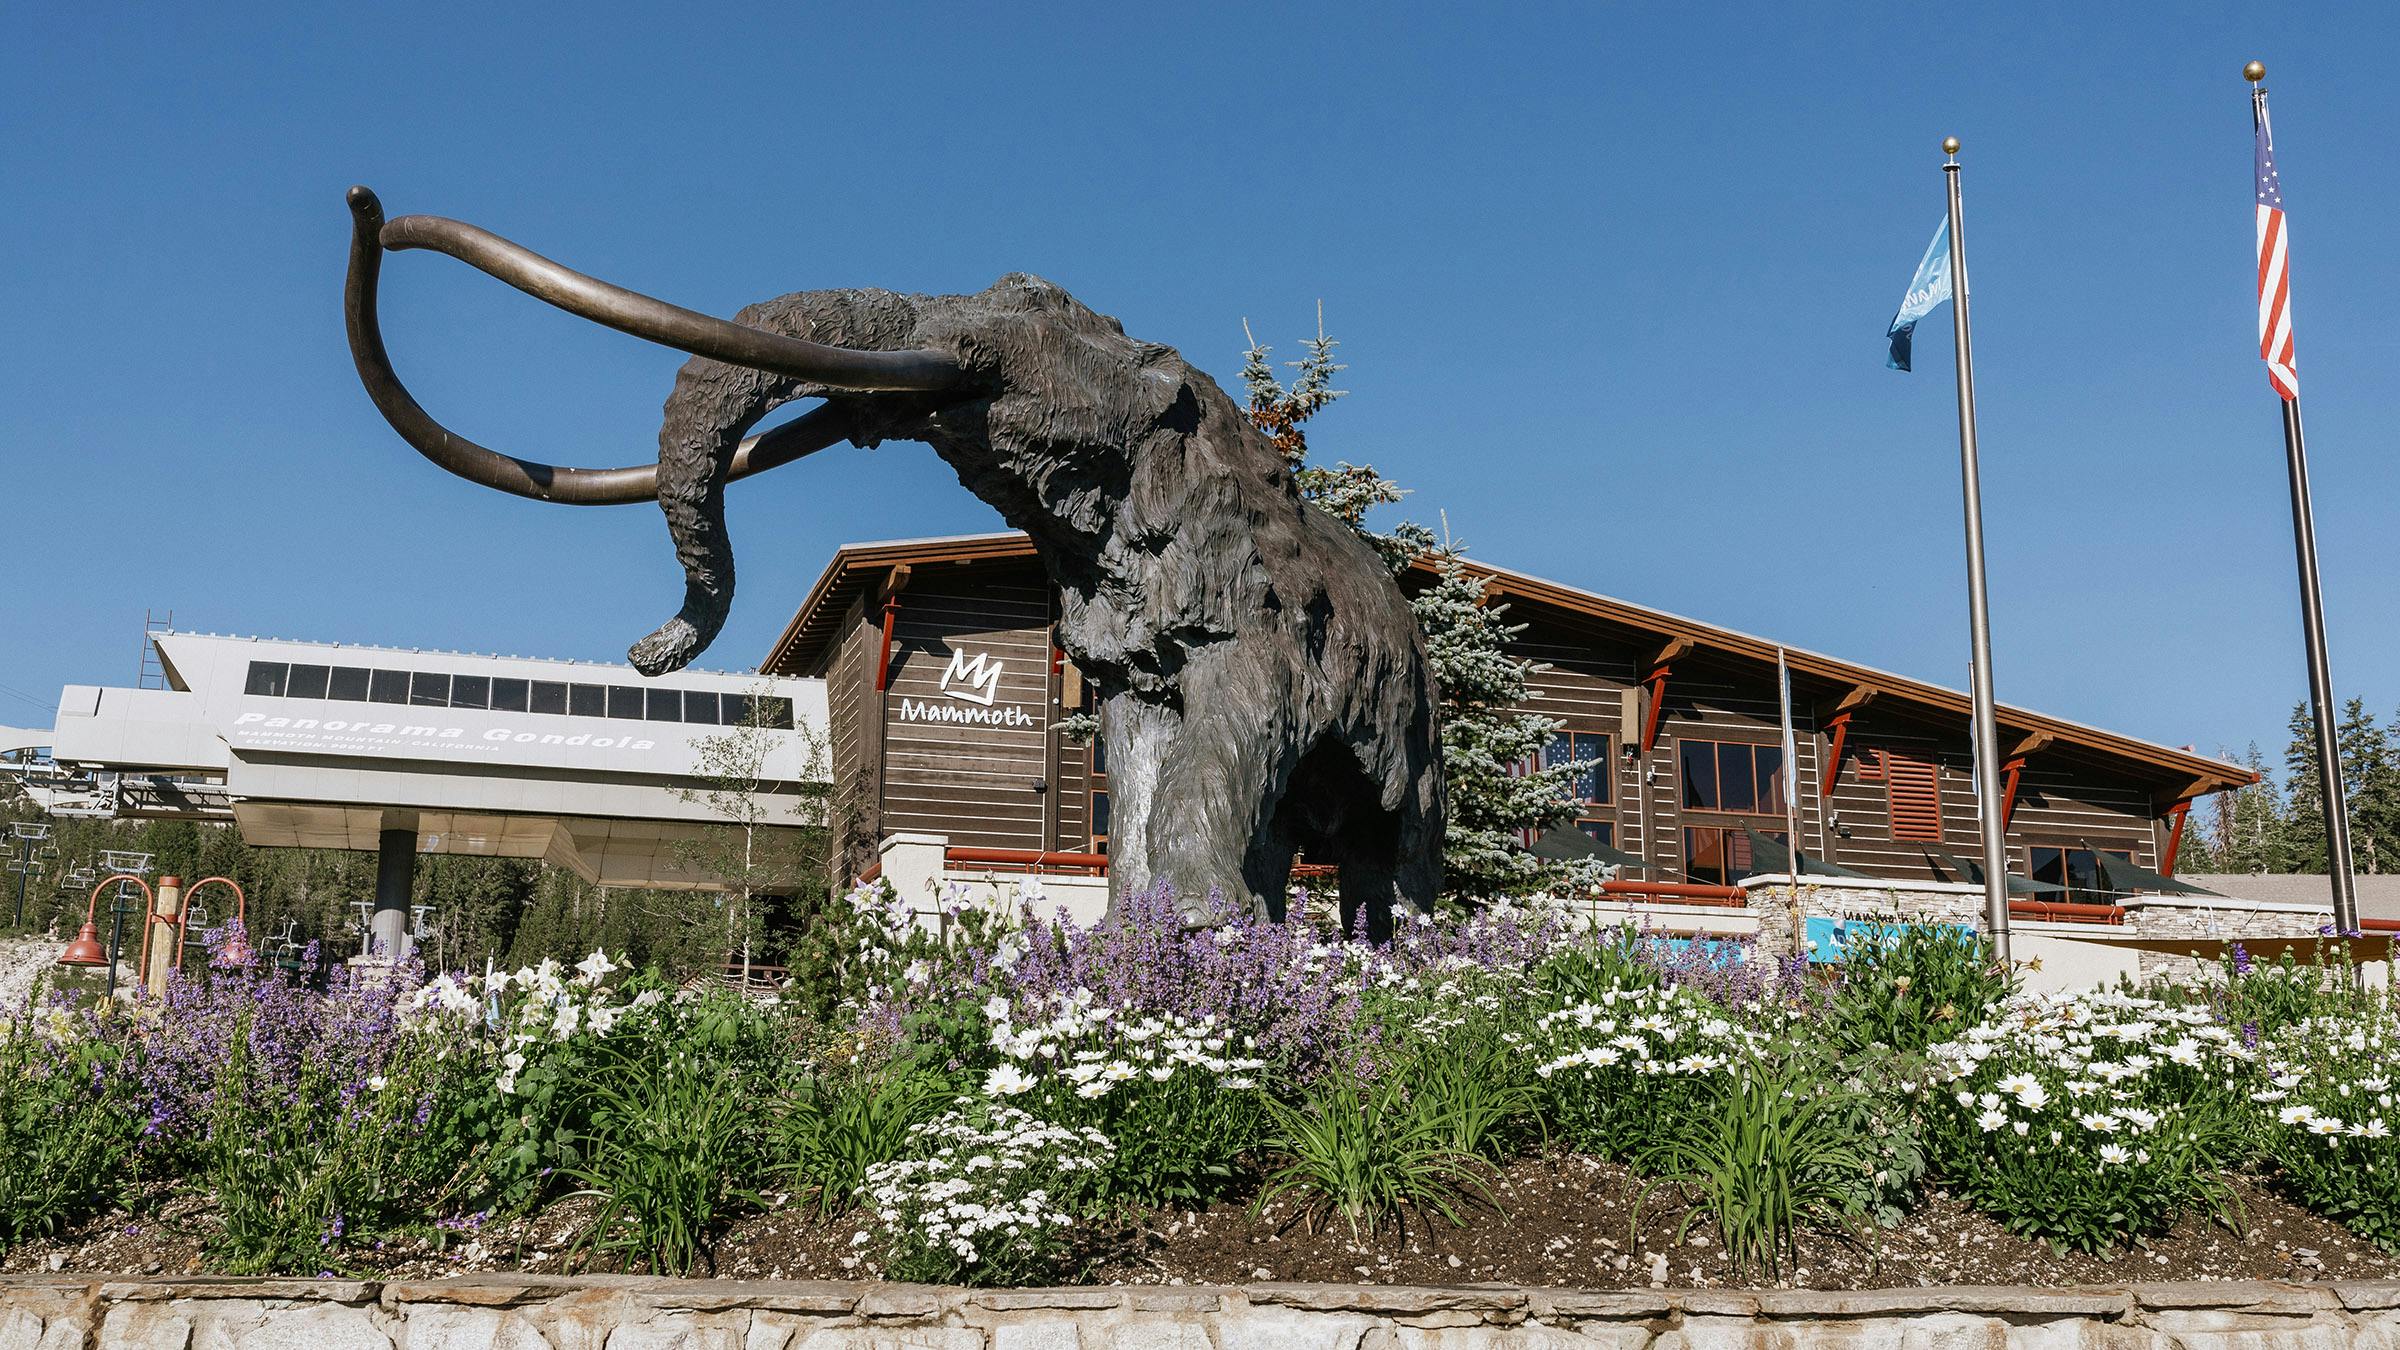 Woolly Mammoth statue in summer in front of Panorama Gondola building